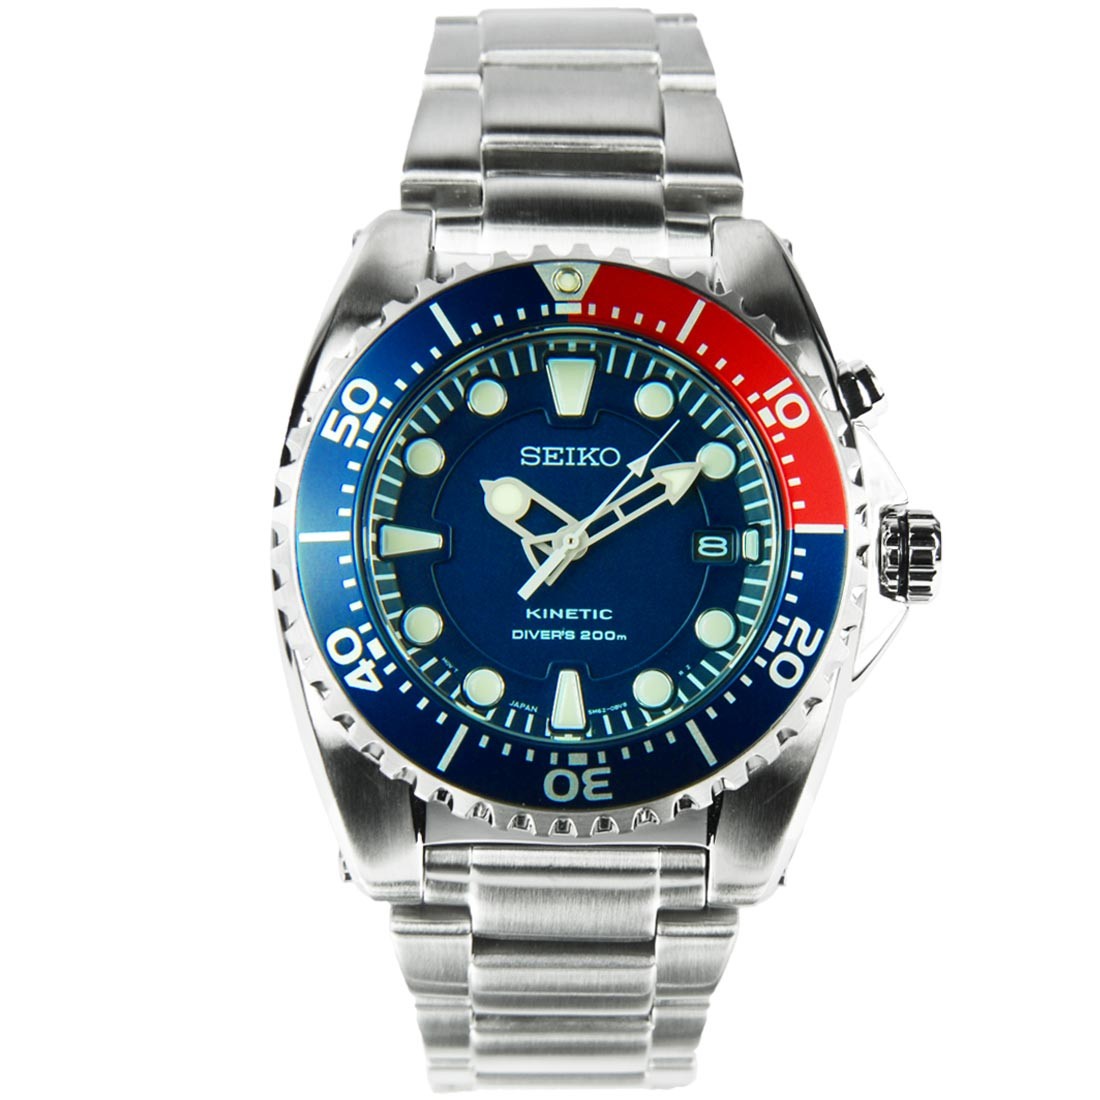 10 Seiko Kinetic Watches Men - The Watch Blog